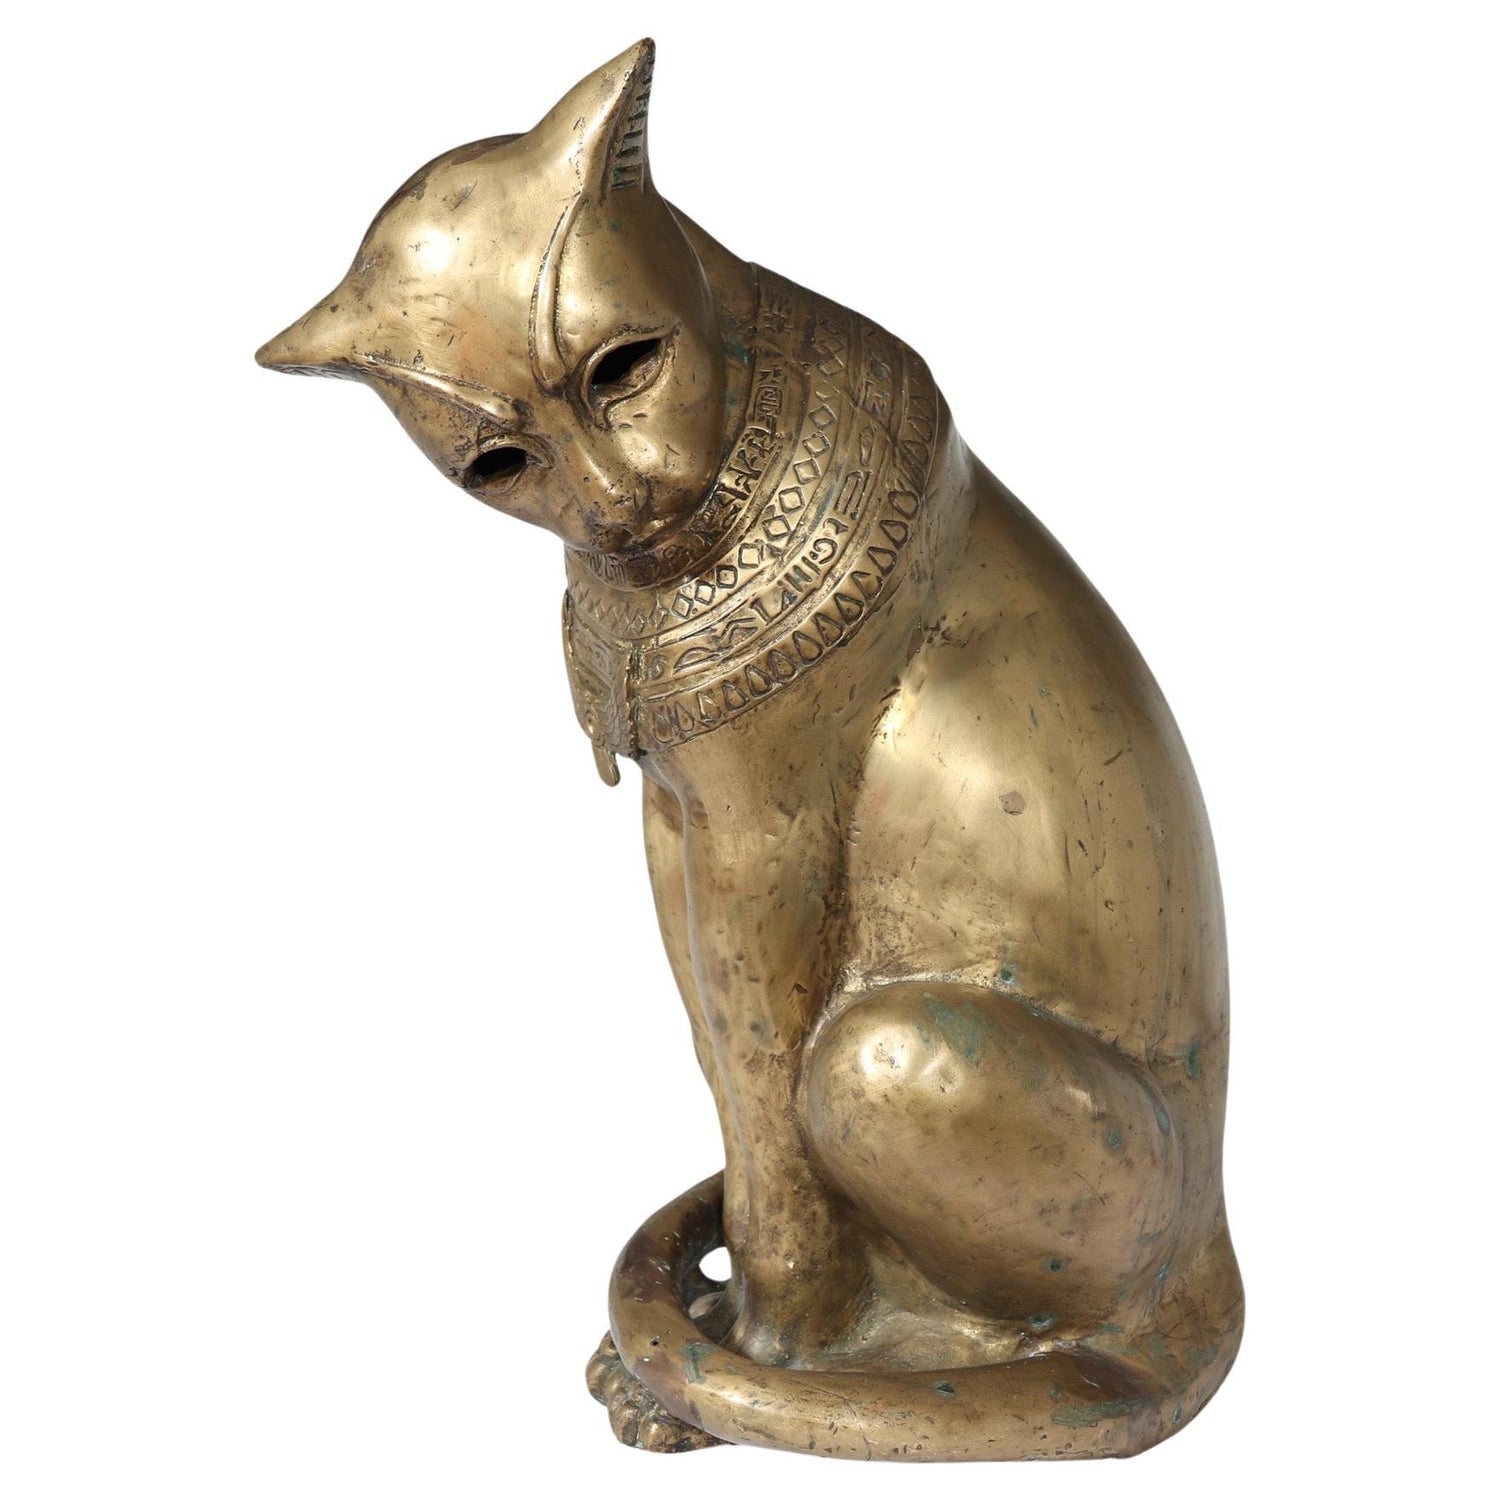 Bastet Cat Statues - Egyptian Goddess Collectibles - Multiple